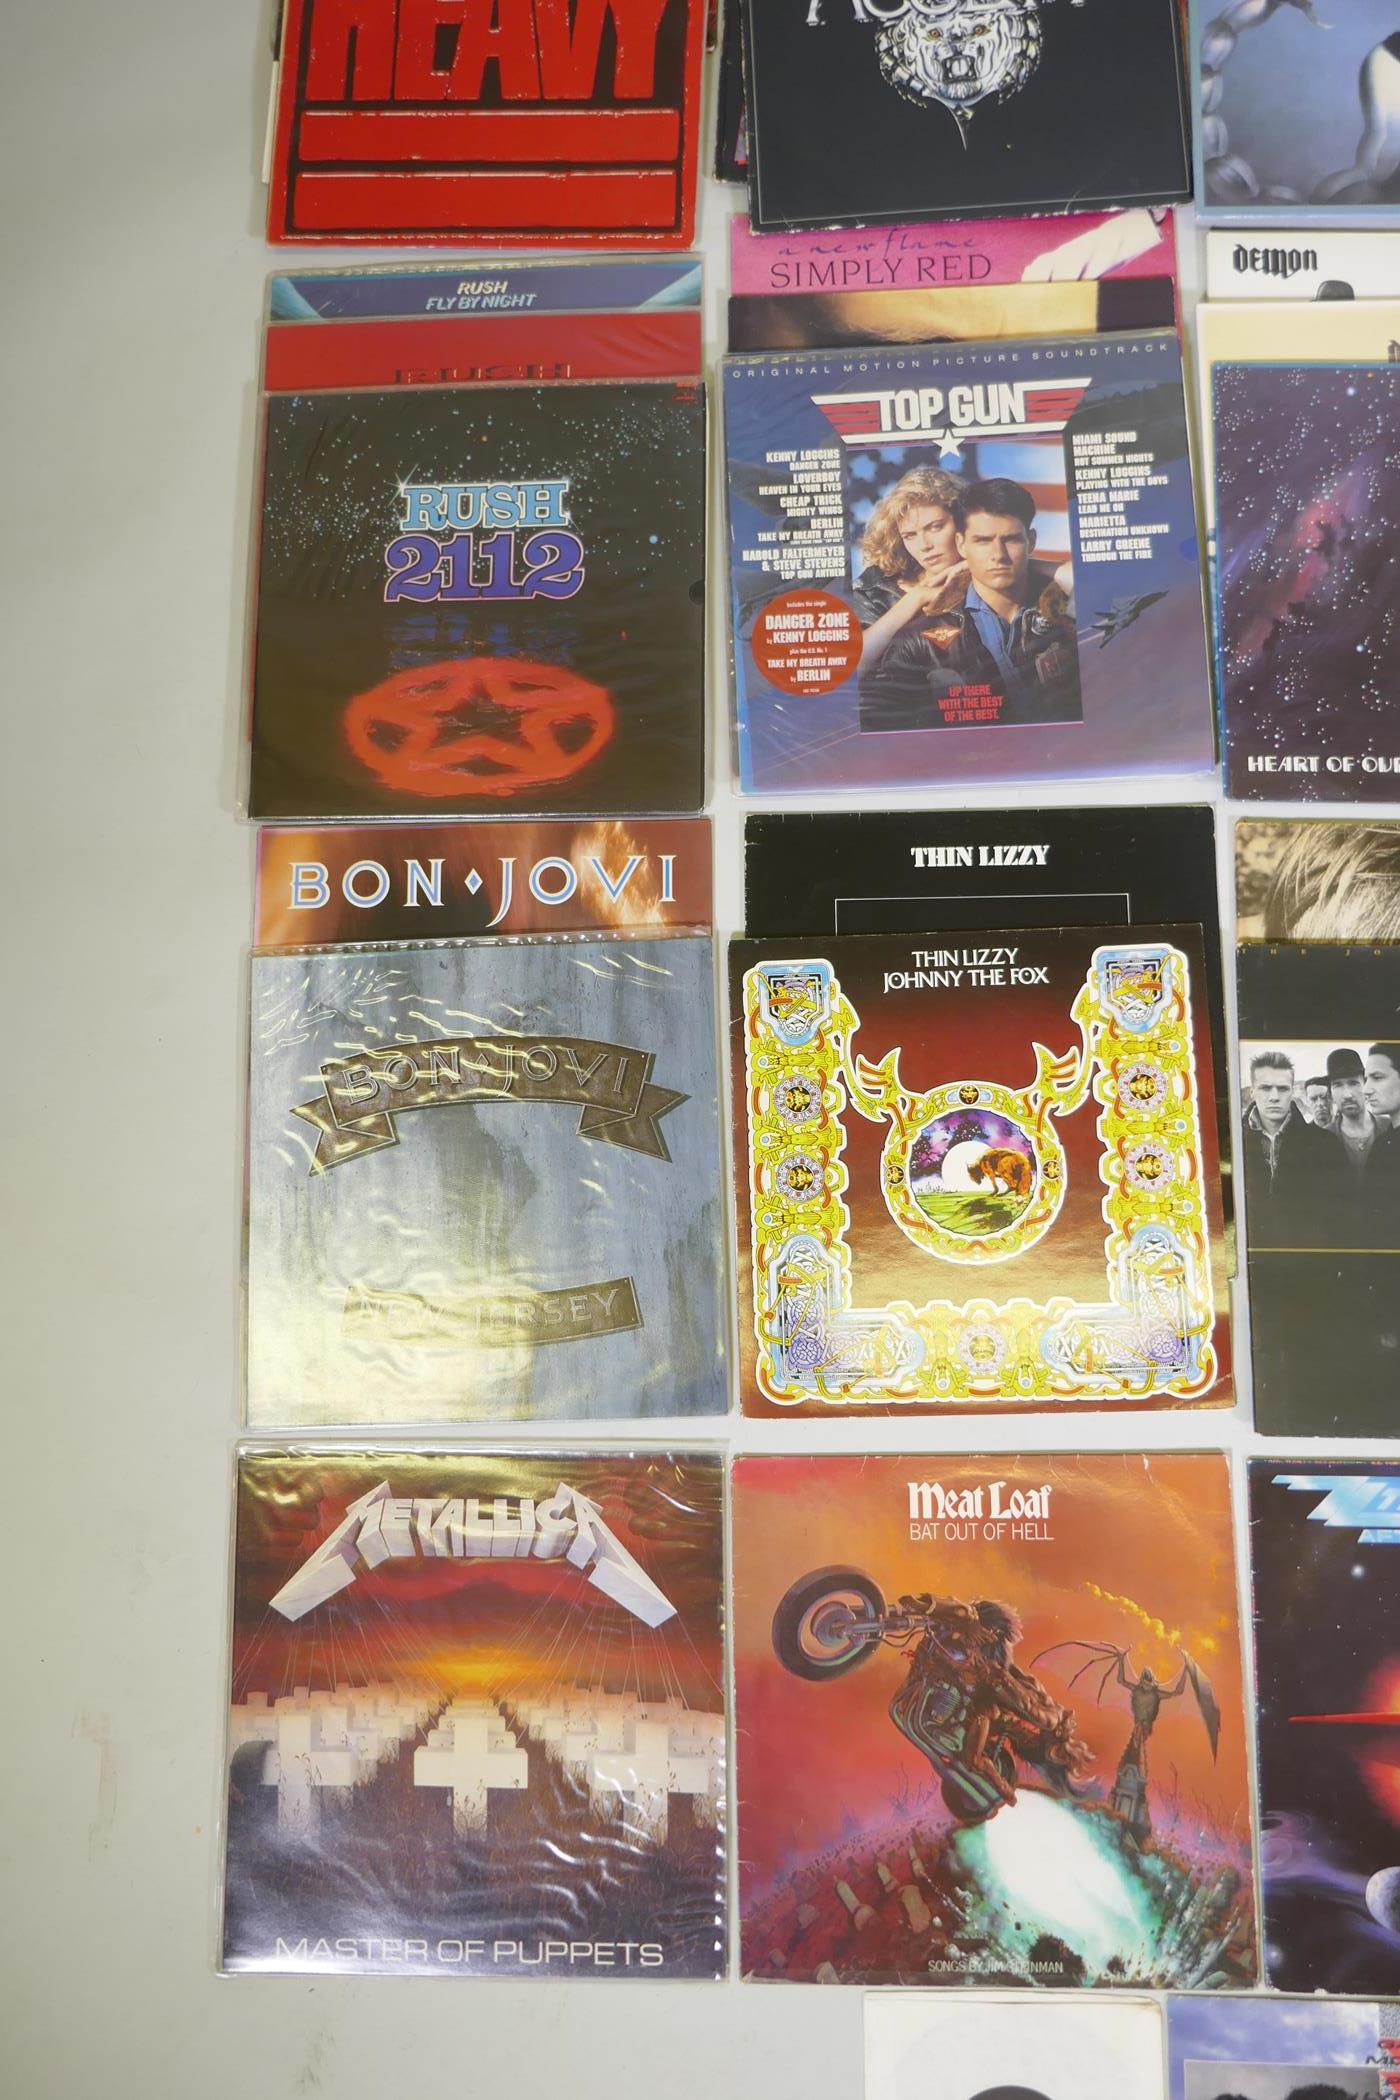 A quantity of 12" metal and rock vinyl LPs including Metallica, Meatloaf, Thin Lizzy, Motorhead, - Image 9 of 16